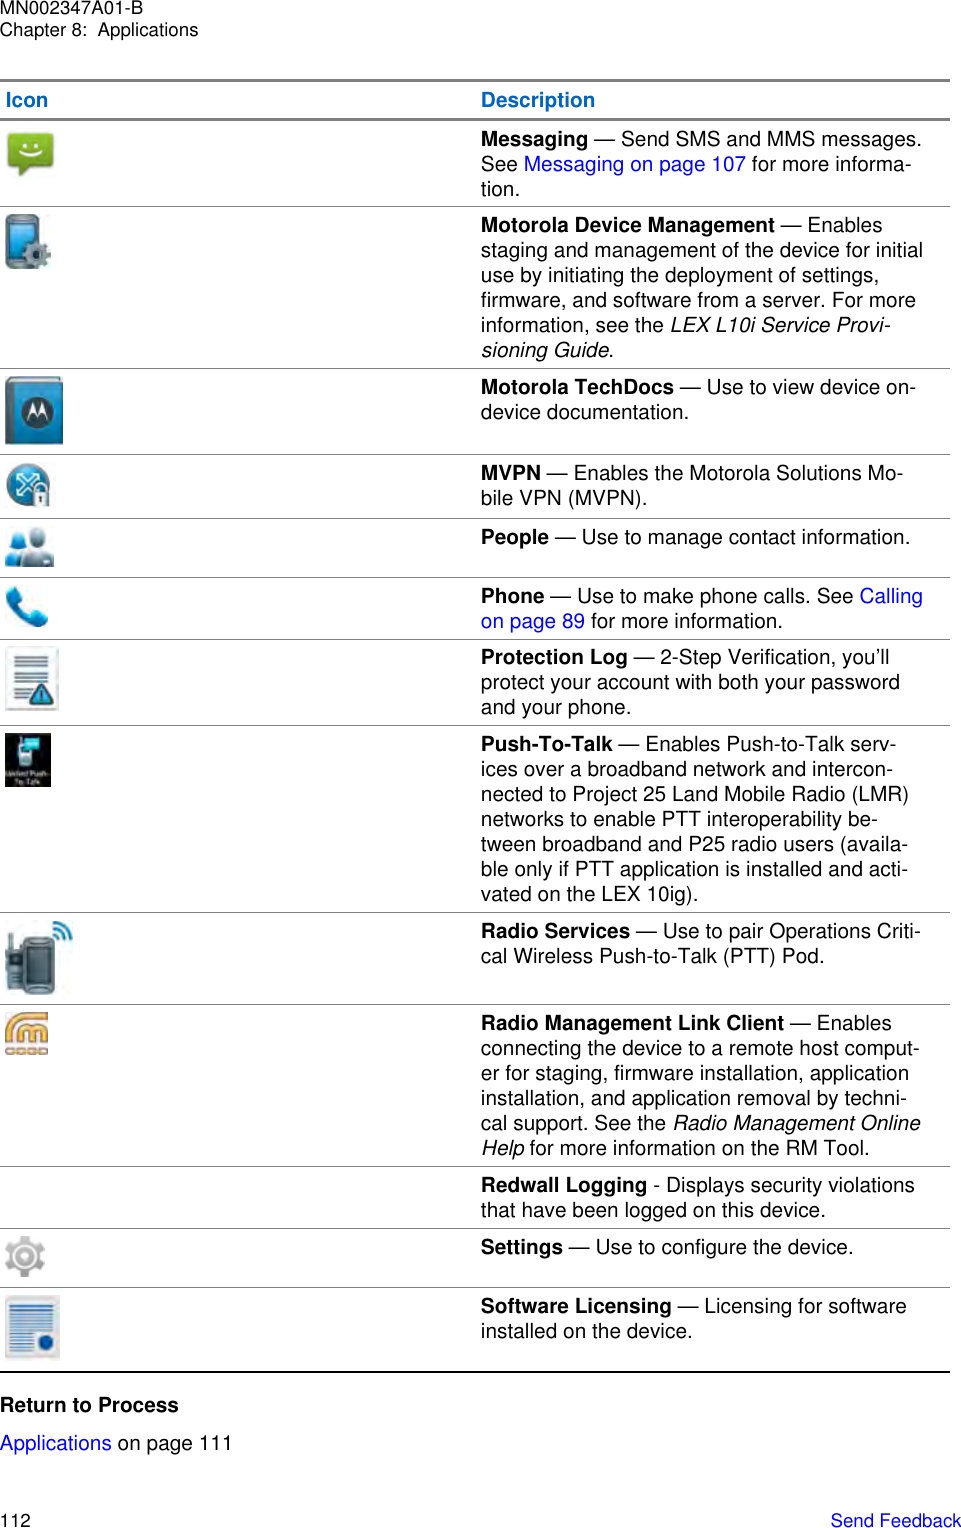 Icon DescriptionMessaging — Send SMS and MMS messages.See Messaging on page 107 for more informa-tion.Motorola Device Management — Enablesstaging and management of the device for initialuse by initiating the deployment of settings,firmware, and software from a server. For moreinformation, see the LEX L10i Service Provi-sioning Guide.Motorola TechDocs — Use to view device on-device documentation.MVPN — Enables the Motorola Solutions Mo-bile VPN (MVPN).People — Use to manage contact information.Phone — Use to make phone calls. See Callingon page 89 for more information.Protection Log — 2-Step Verification, you’llprotect your account with both your passwordand your phone.Push-To-Talk — Enables Push-to-Talk serv-ices over a broadband network and intercon-nected to Project 25 Land Mobile Radio (LMR)networks to enable PTT interoperability be-tween broadband and P25 radio users (availa-ble only if PTT application is installed and acti-vated on the LEX 10ig).Radio Services — Use to pair Operations Criti-cal Wireless Push-to-Talk (PTT) Pod.Radio Management Link Client — Enablesconnecting the device to a remote host comput-er for staging, firmware installation, applicationinstallation, and application removal by techni-cal support. See the Radio Management OnlineHelp for more information on the RM Tool.Redwall Logging - Displays security violationsthat have been logged on this device.Settings — Use to configure the device.Software Licensing — Licensing for softwareinstalled on the device.Return to ProcessApplications on page 111MN002347A01-BChapter 8:  Applications112   Send Feedback